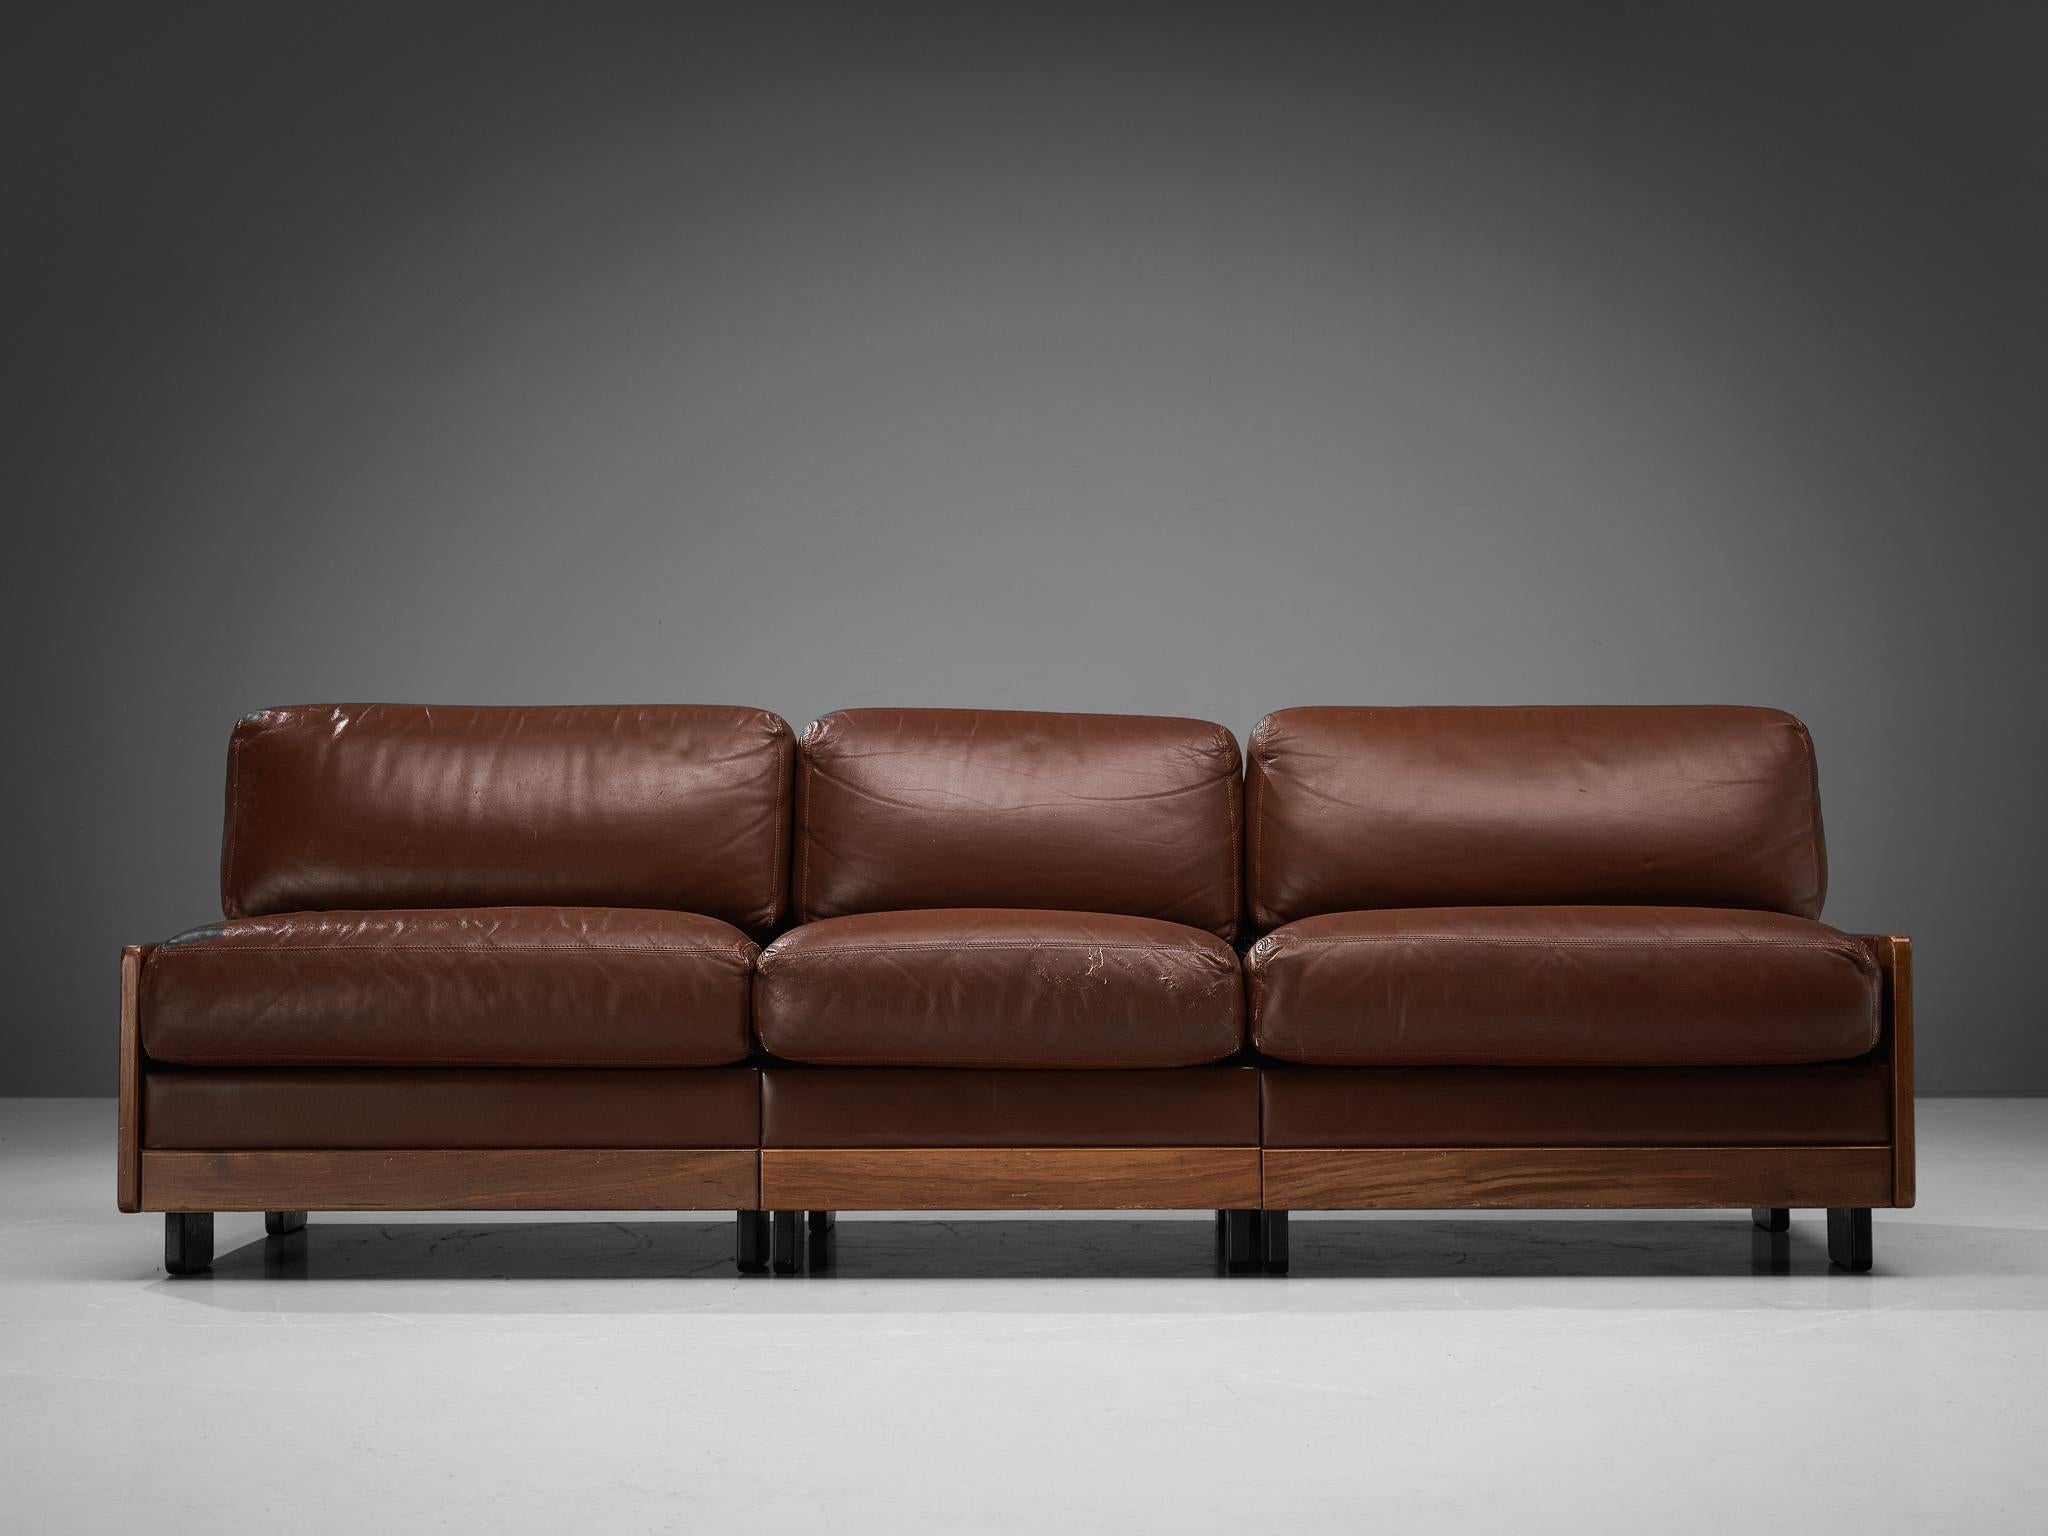 Mid-Century Modern Afra & Tobia Scarpa for Cassina Sofa in Walnut and Brown Leather